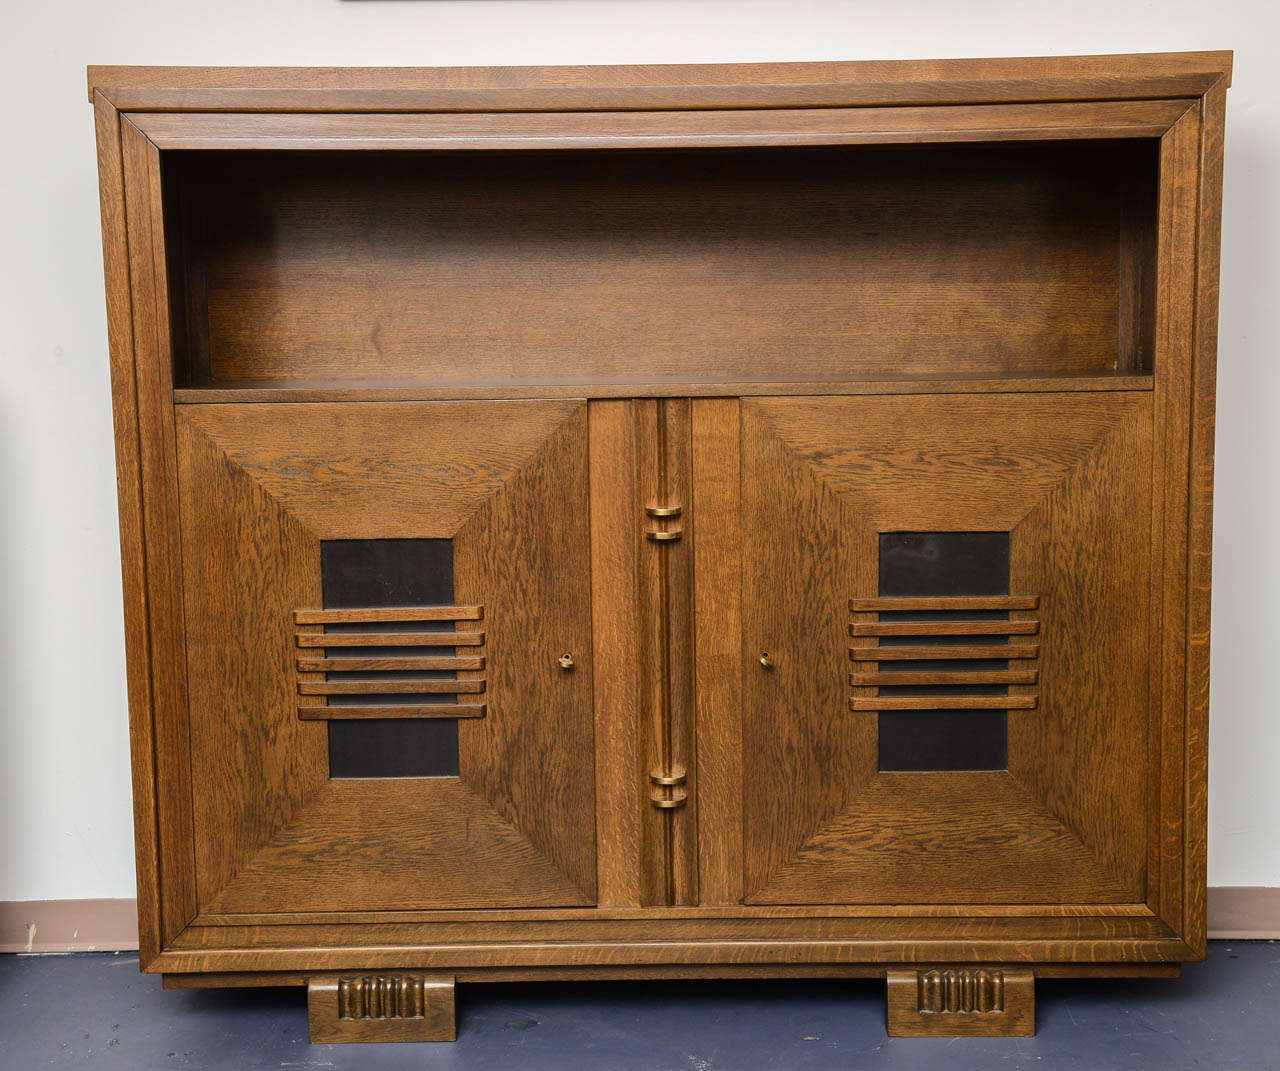 Architectural cabinet designed by Charles DUDOUYT. 
Refined and sophisticated details with geometrical moldings. Very unique and extremely modern conception for this period. Bronze hardwares emphasizing the rigourous lines. High quality golden oak.